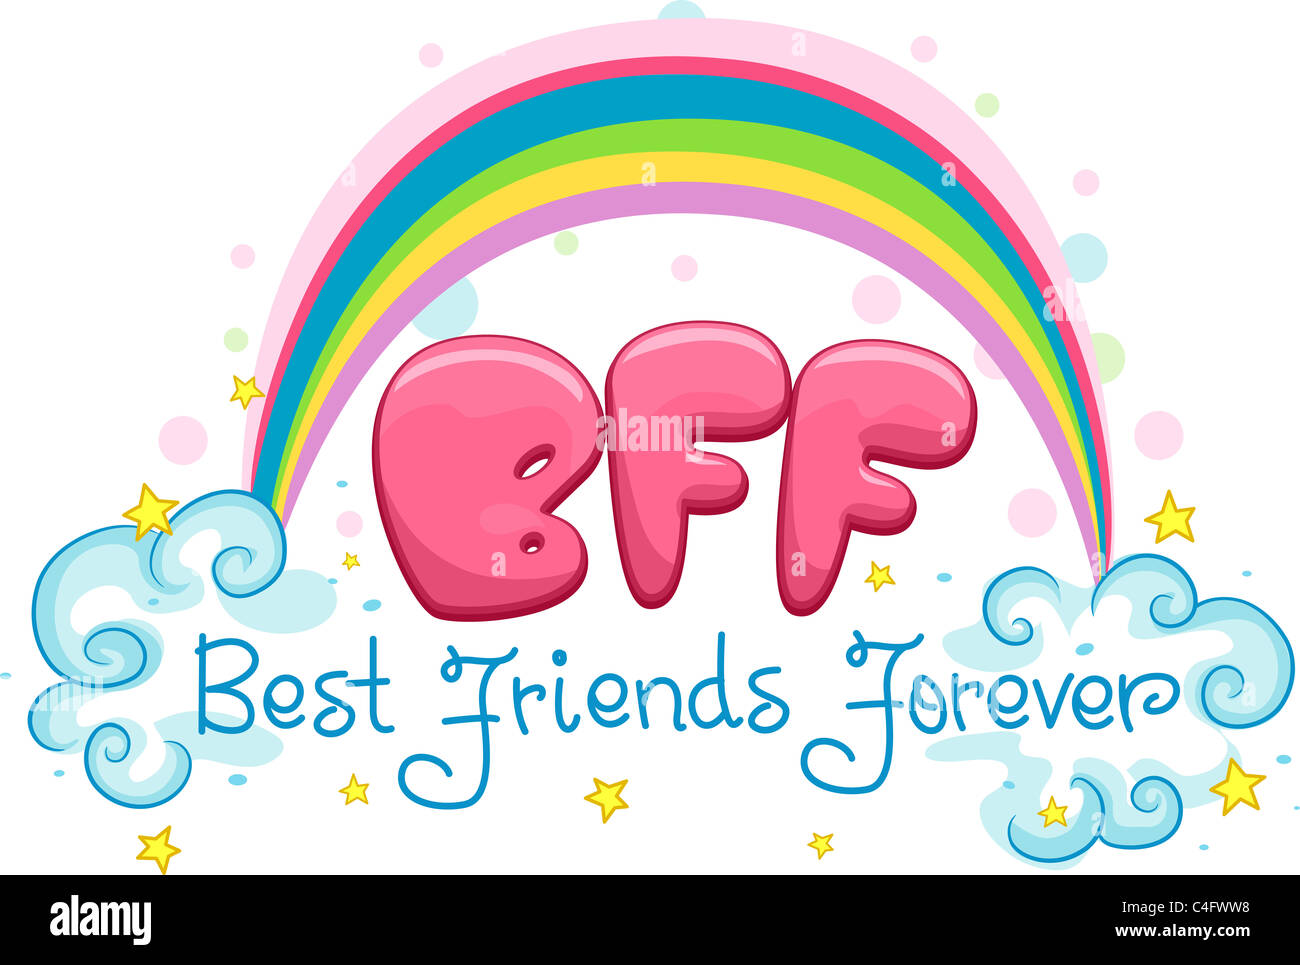 Illustration Featuring the Words Best Friends Forever Stock Photo ...